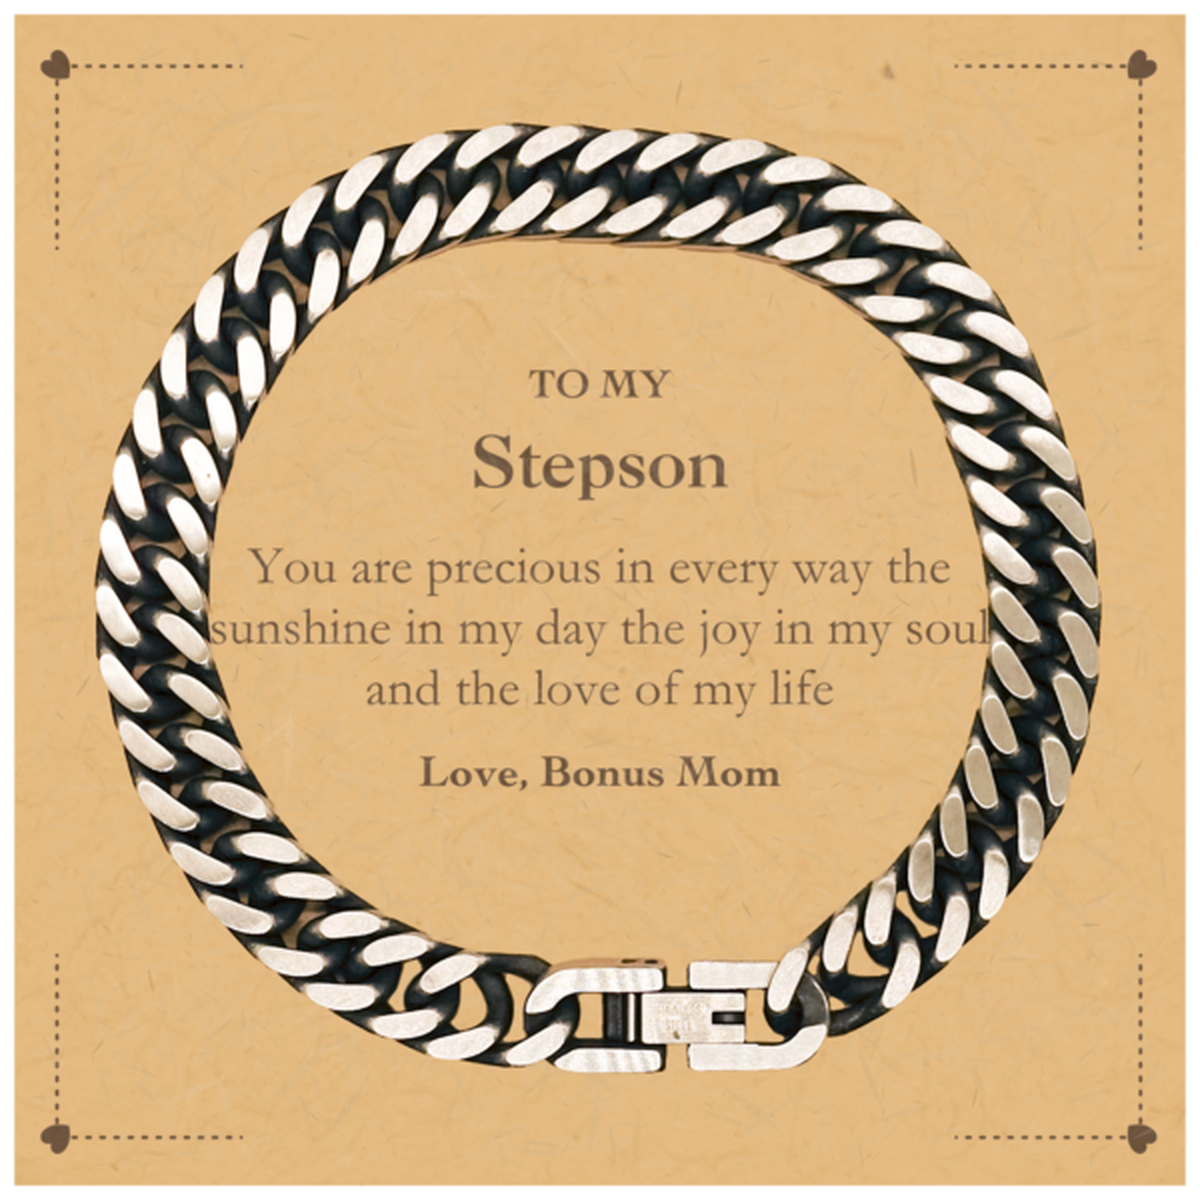 Graduation Gifts for Stepson Cuban Link Chain Bracelet Present from Bonus Mom, Christmas Stepson Birthday Gifts Stepson You are precious in every way the sunshine in my day. Love, Bonus Mom